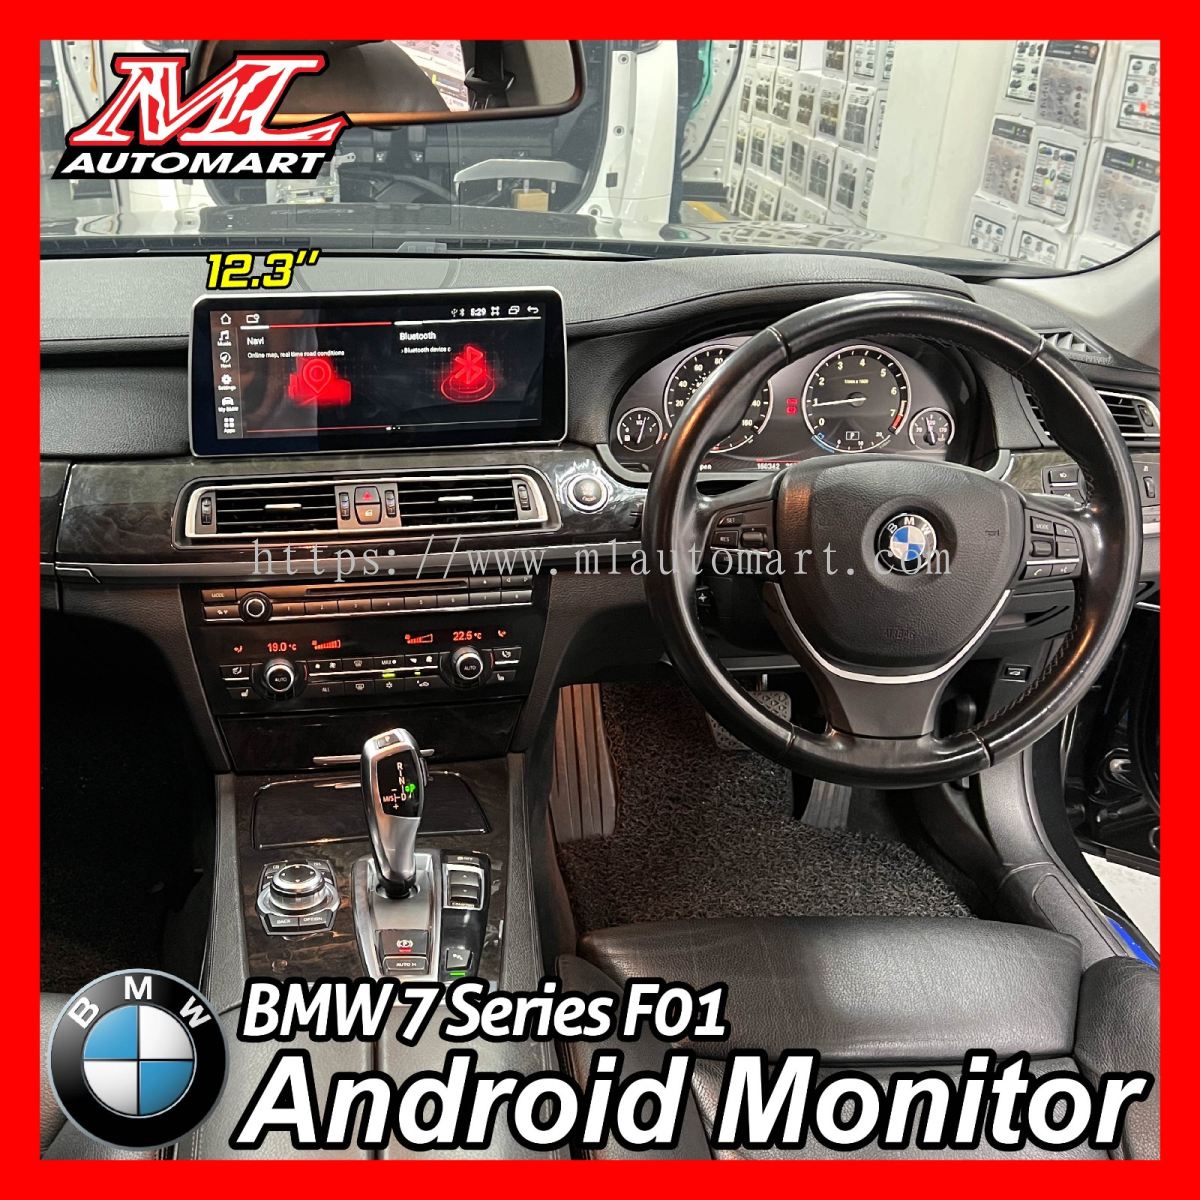 BMW X1 E84 Android Monitor (12.3) (WIthout IDrive) Selangor